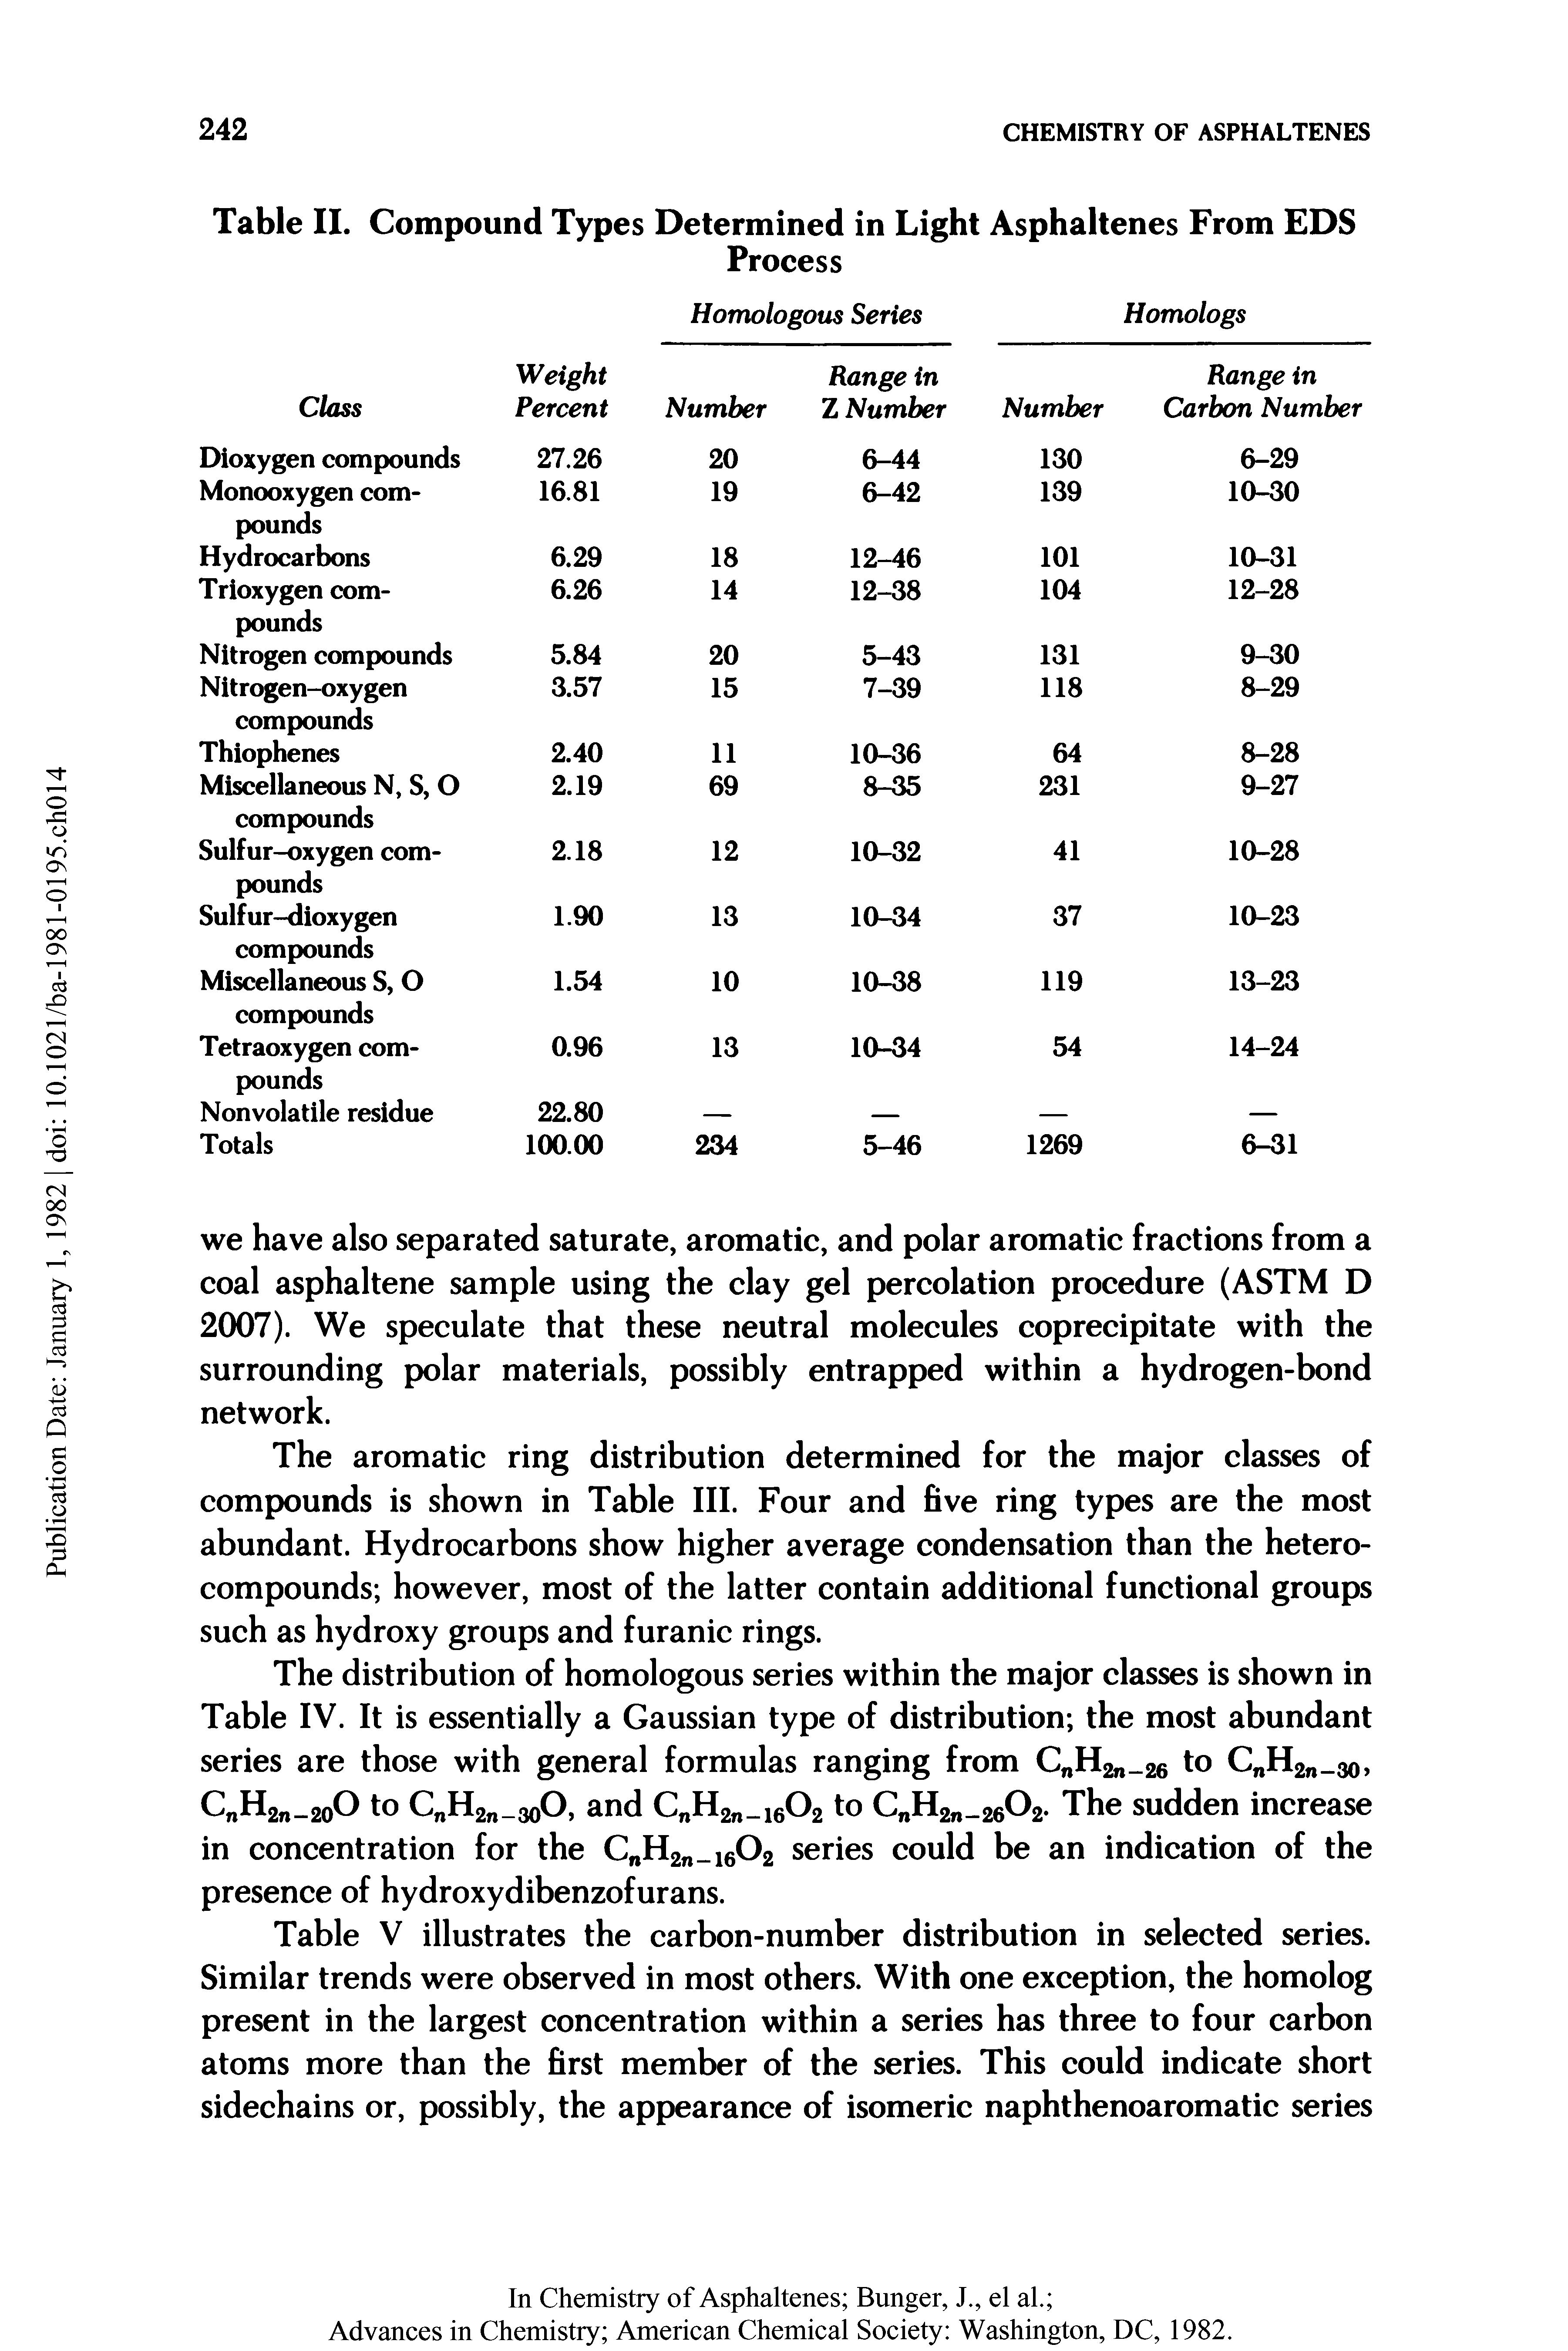 Table V illustrates the carbon-number distribution in selected series. Similar trends were observed in most others. With one exception, the homolog present in the largest concentration within a series has three to four carbon atoms more than the first member of the series. This could indicate short sidechains or, possibly, the appearance of isomeric naphthenoaromatic series...